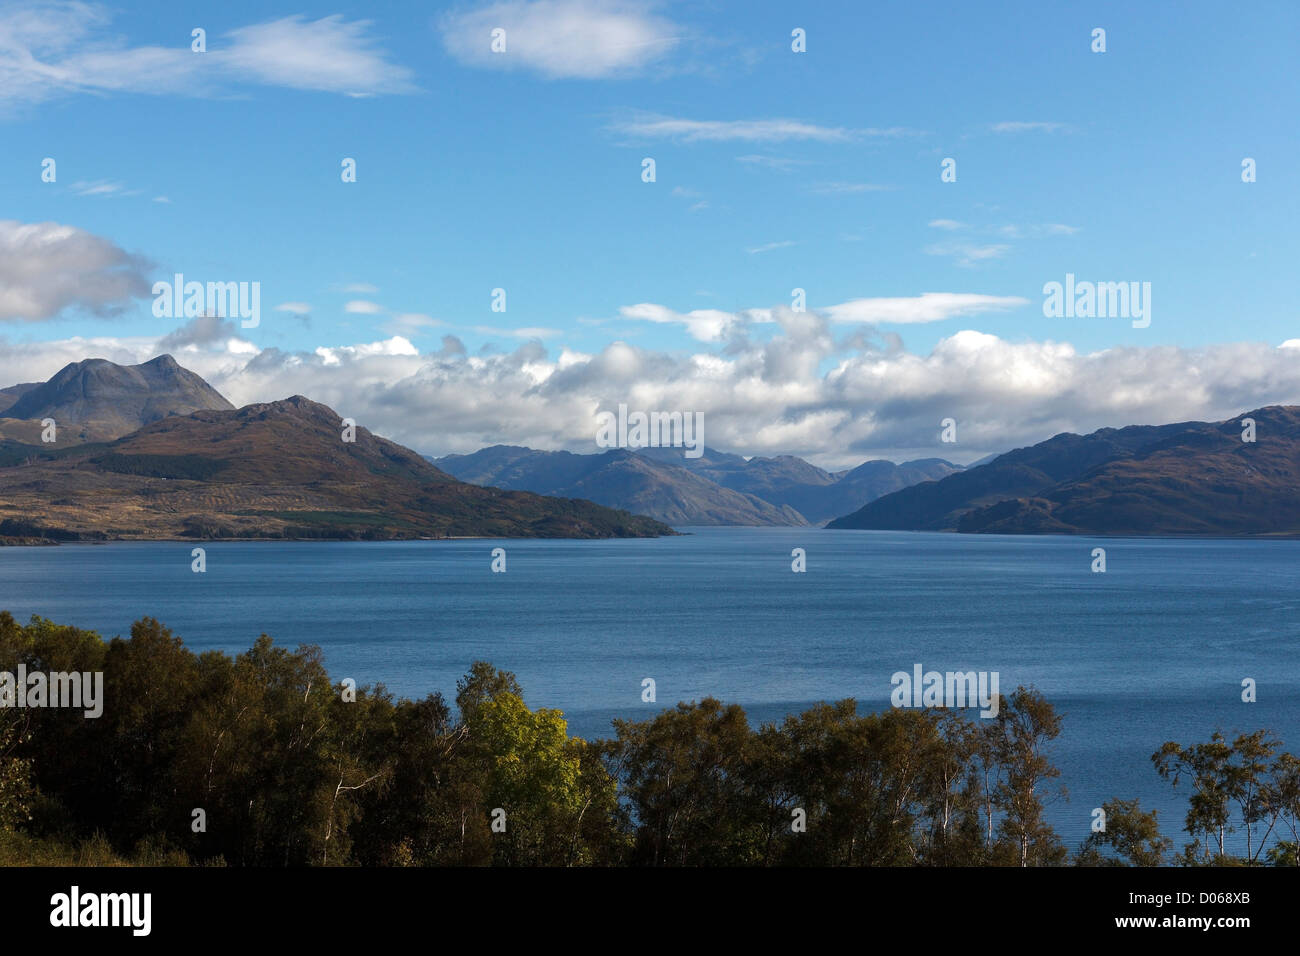 Entrance to Loch Hourn surrounded by mountains of the Scottish Highlands as seen from the Isle of Skye across the Sound of Sleat Stock Photo